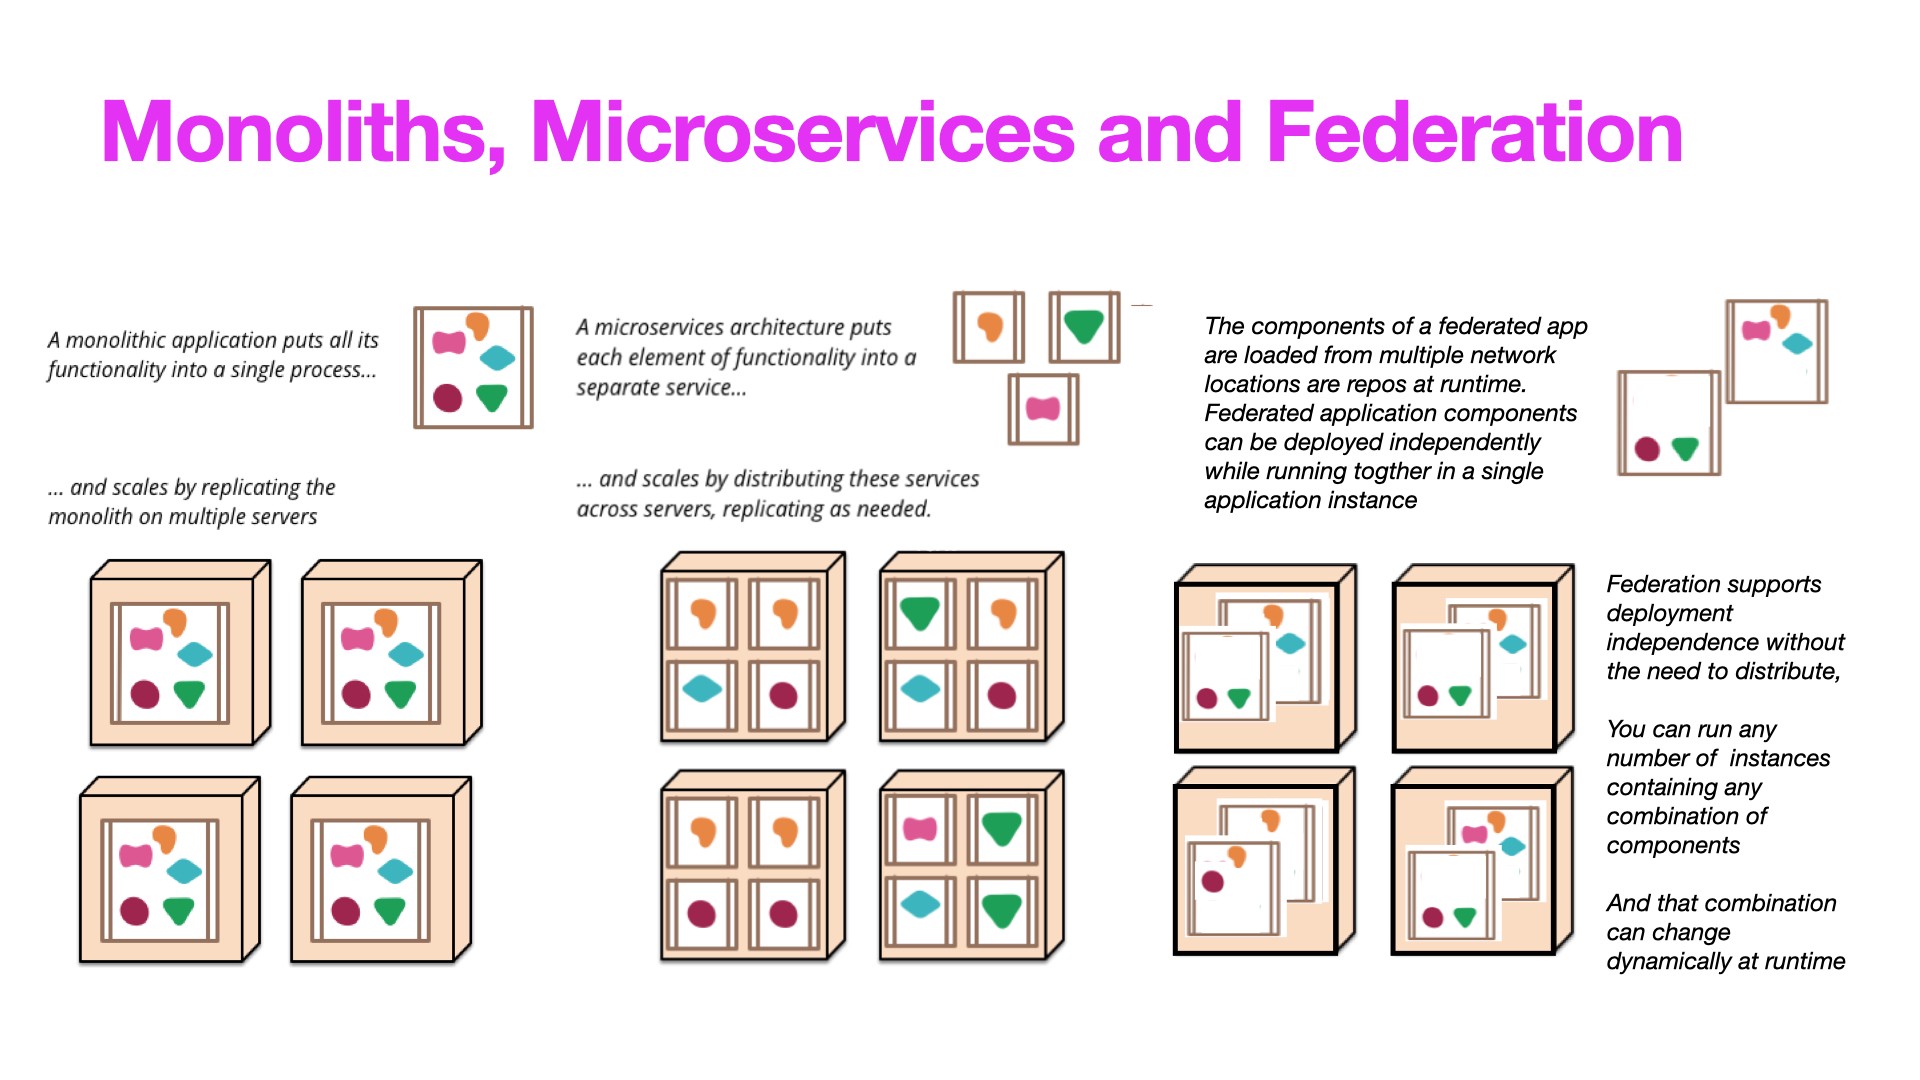 An image from martinfowler.com updated to include federated applications